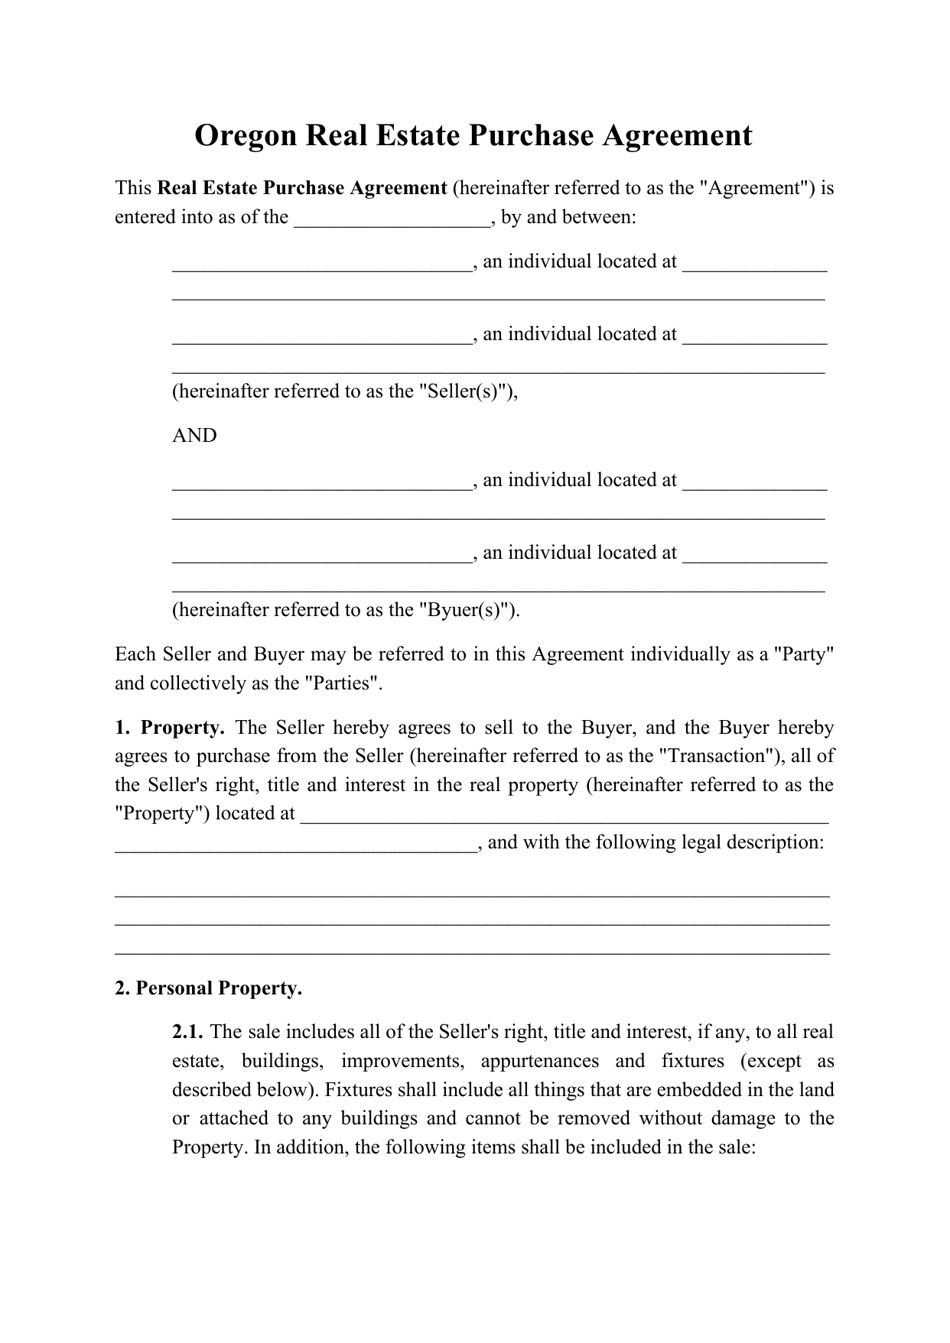 Real Estate Purchase Agreement Template - Oregon, Page 1